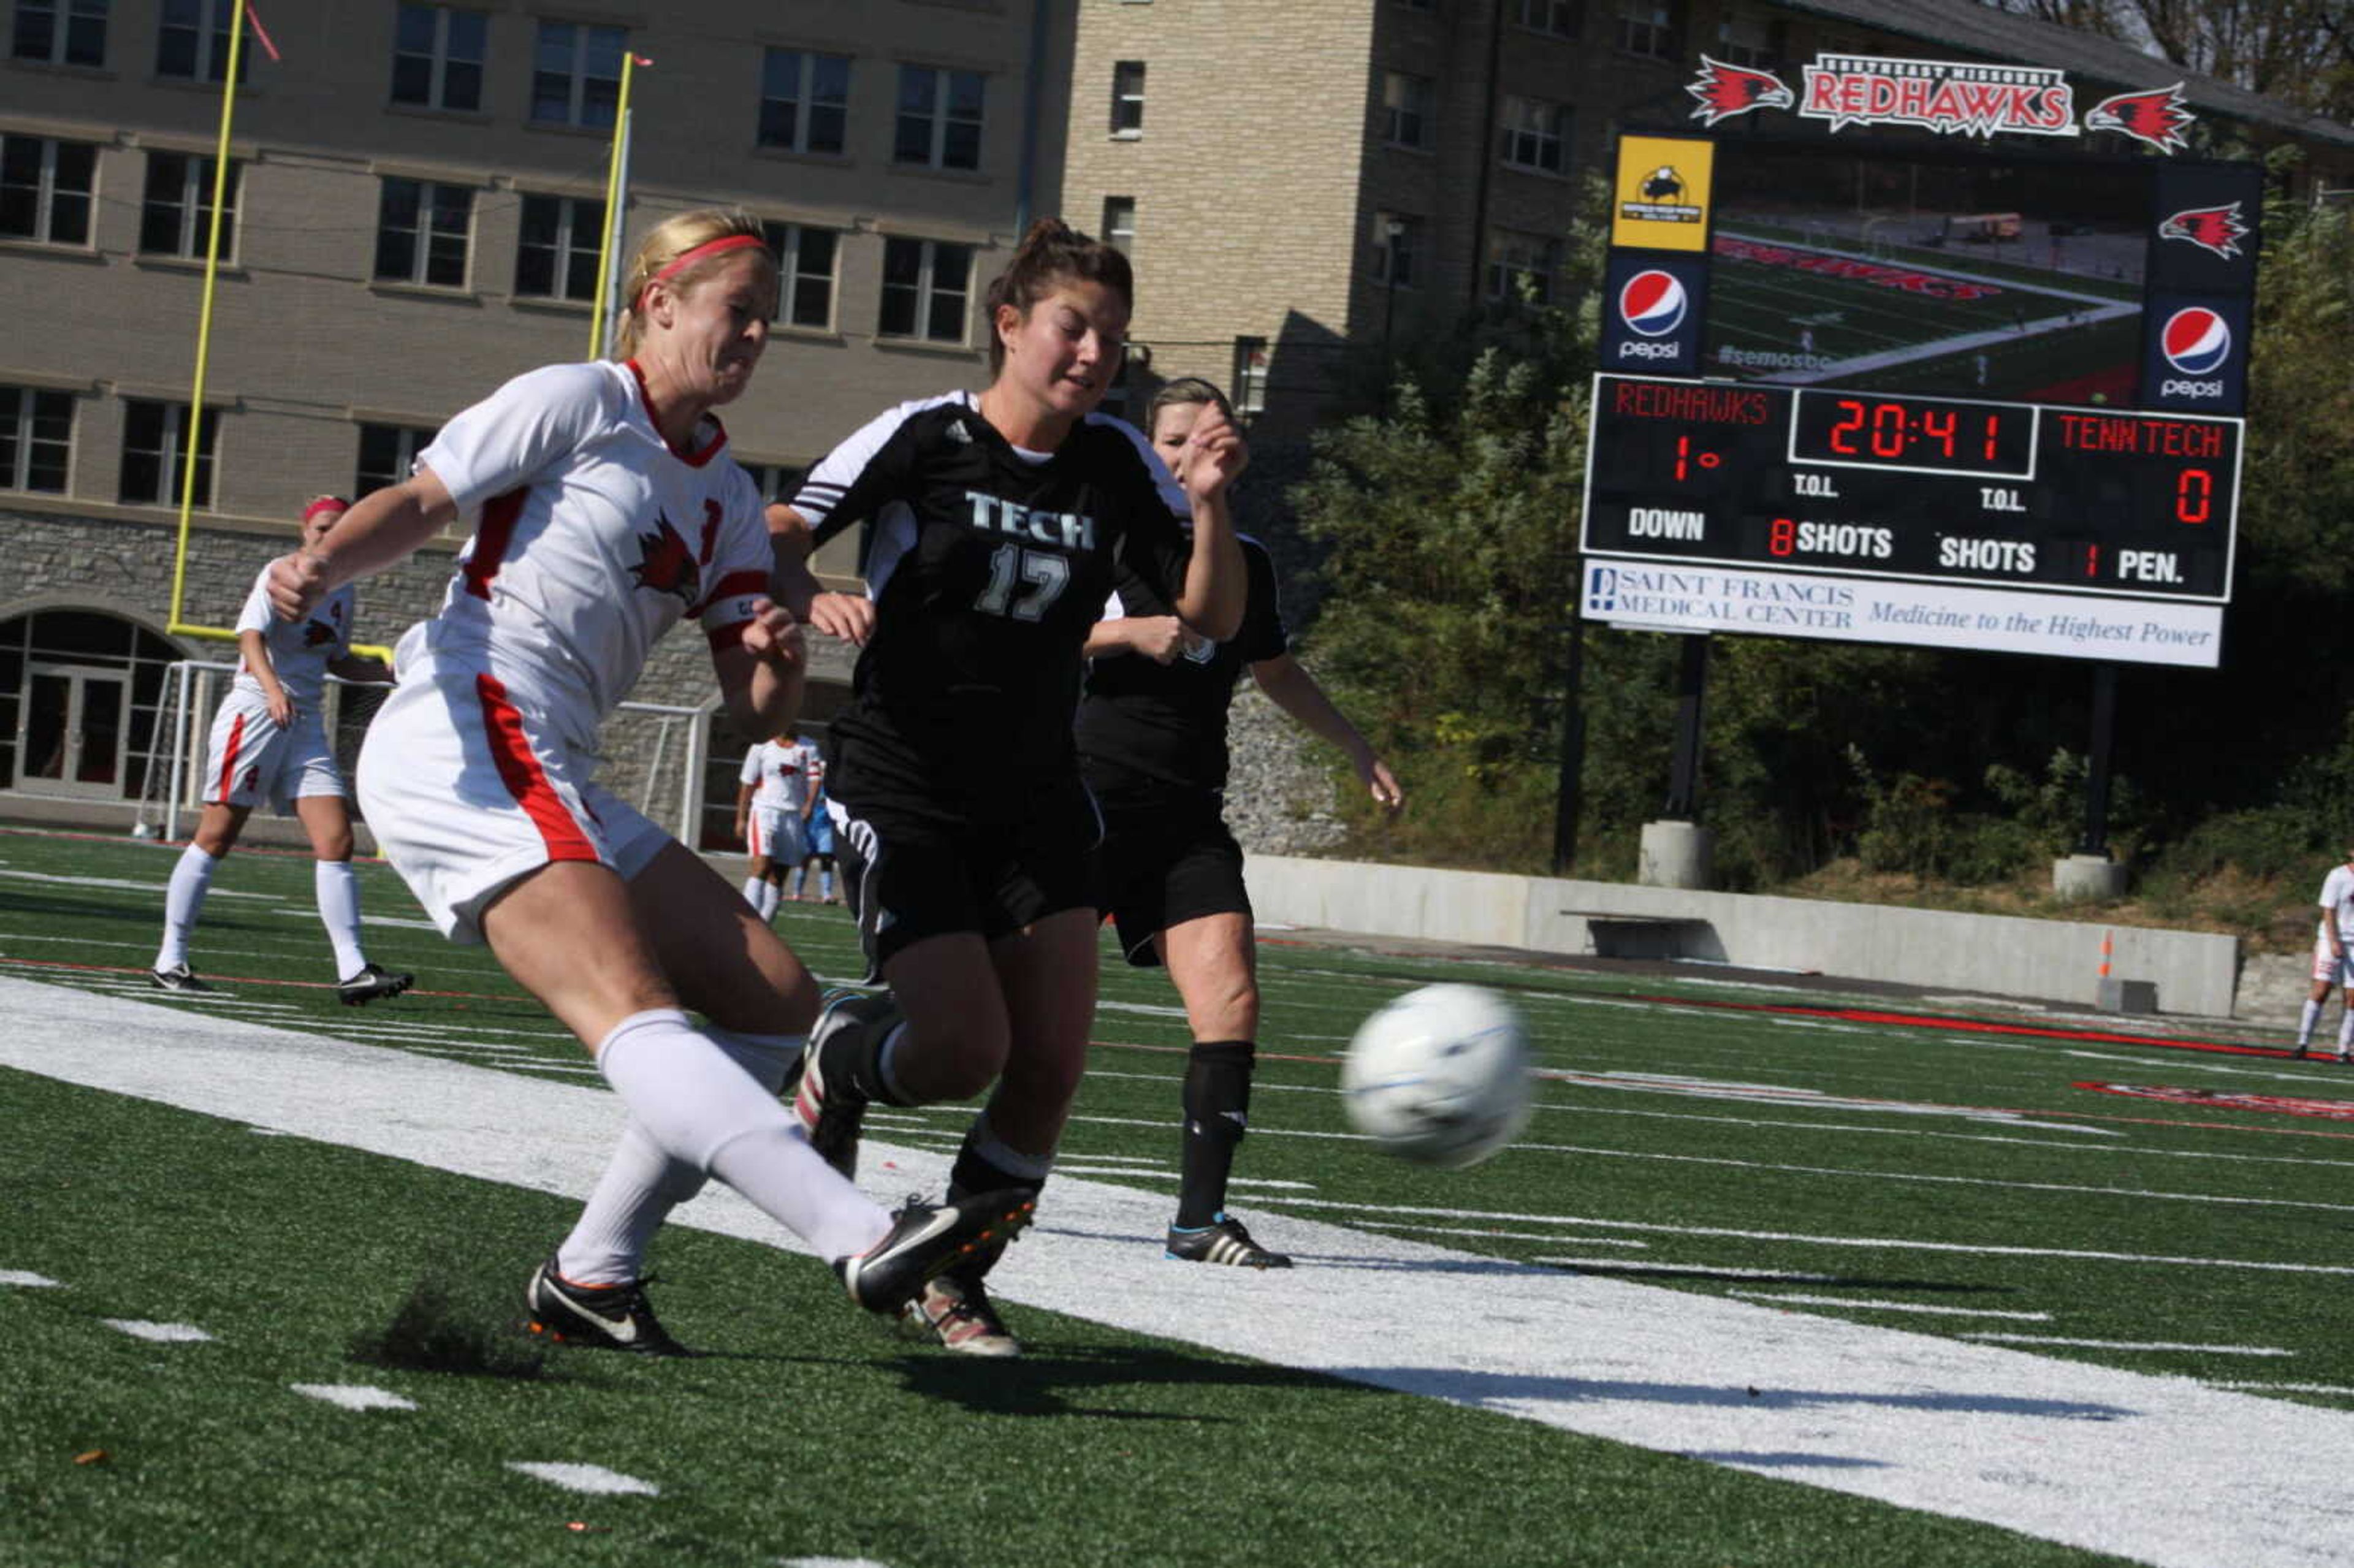 Southeast's Shona Goodwin and TTU's Taylor Hicks jostle for possession of the ball during the first half of Sunday's game. - Photo by Kelso Hope